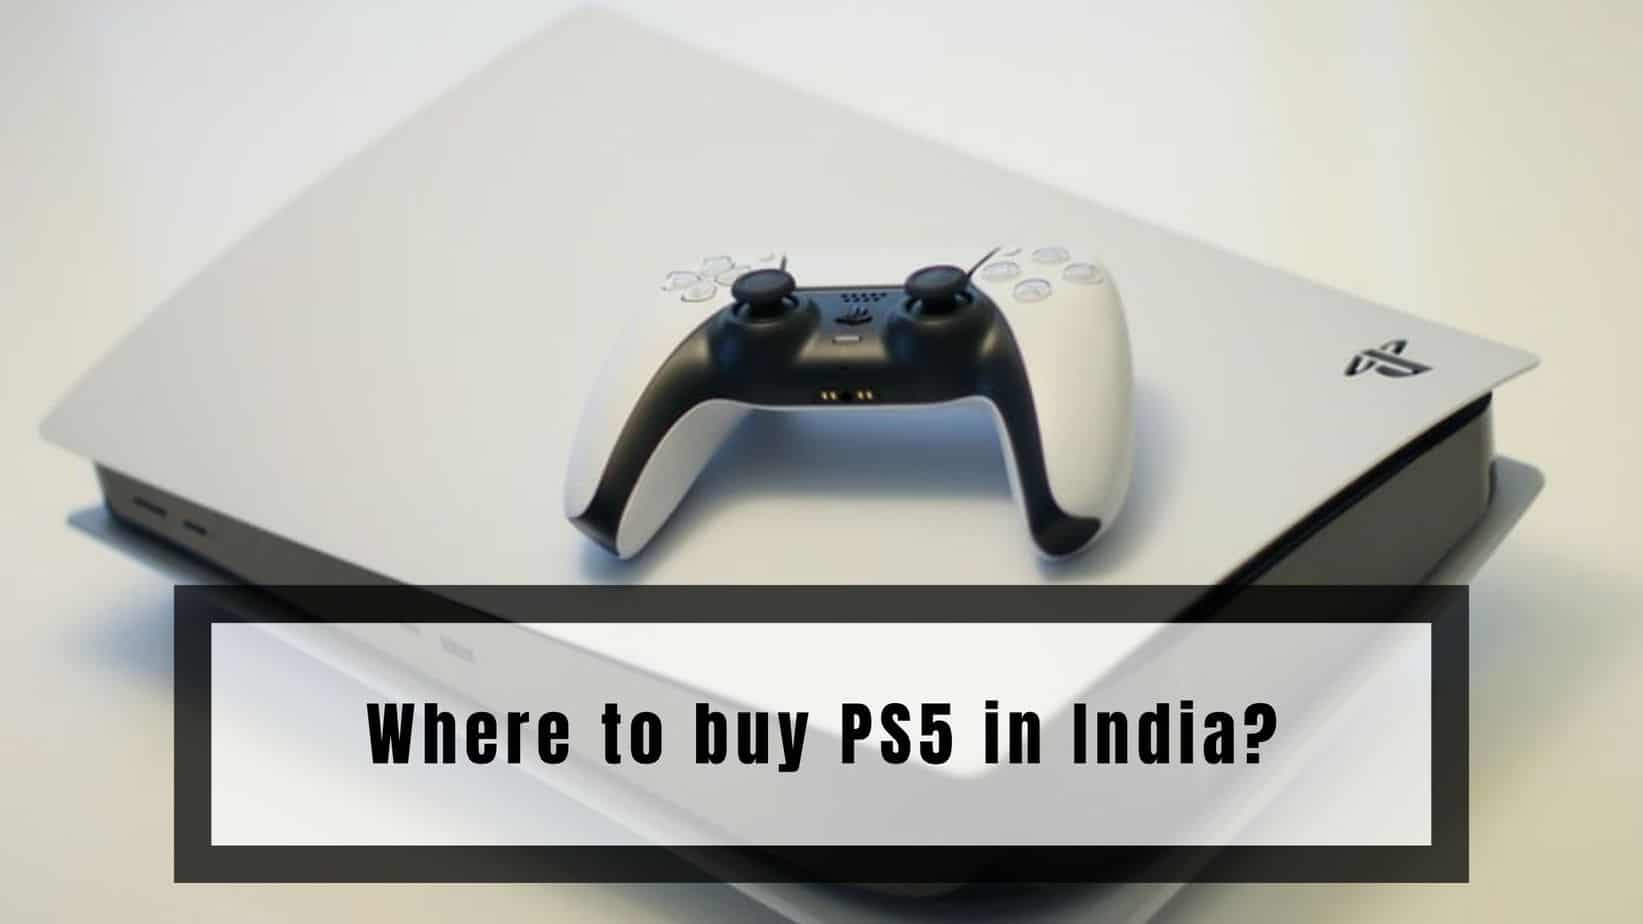 Where to buy PS5 in India?